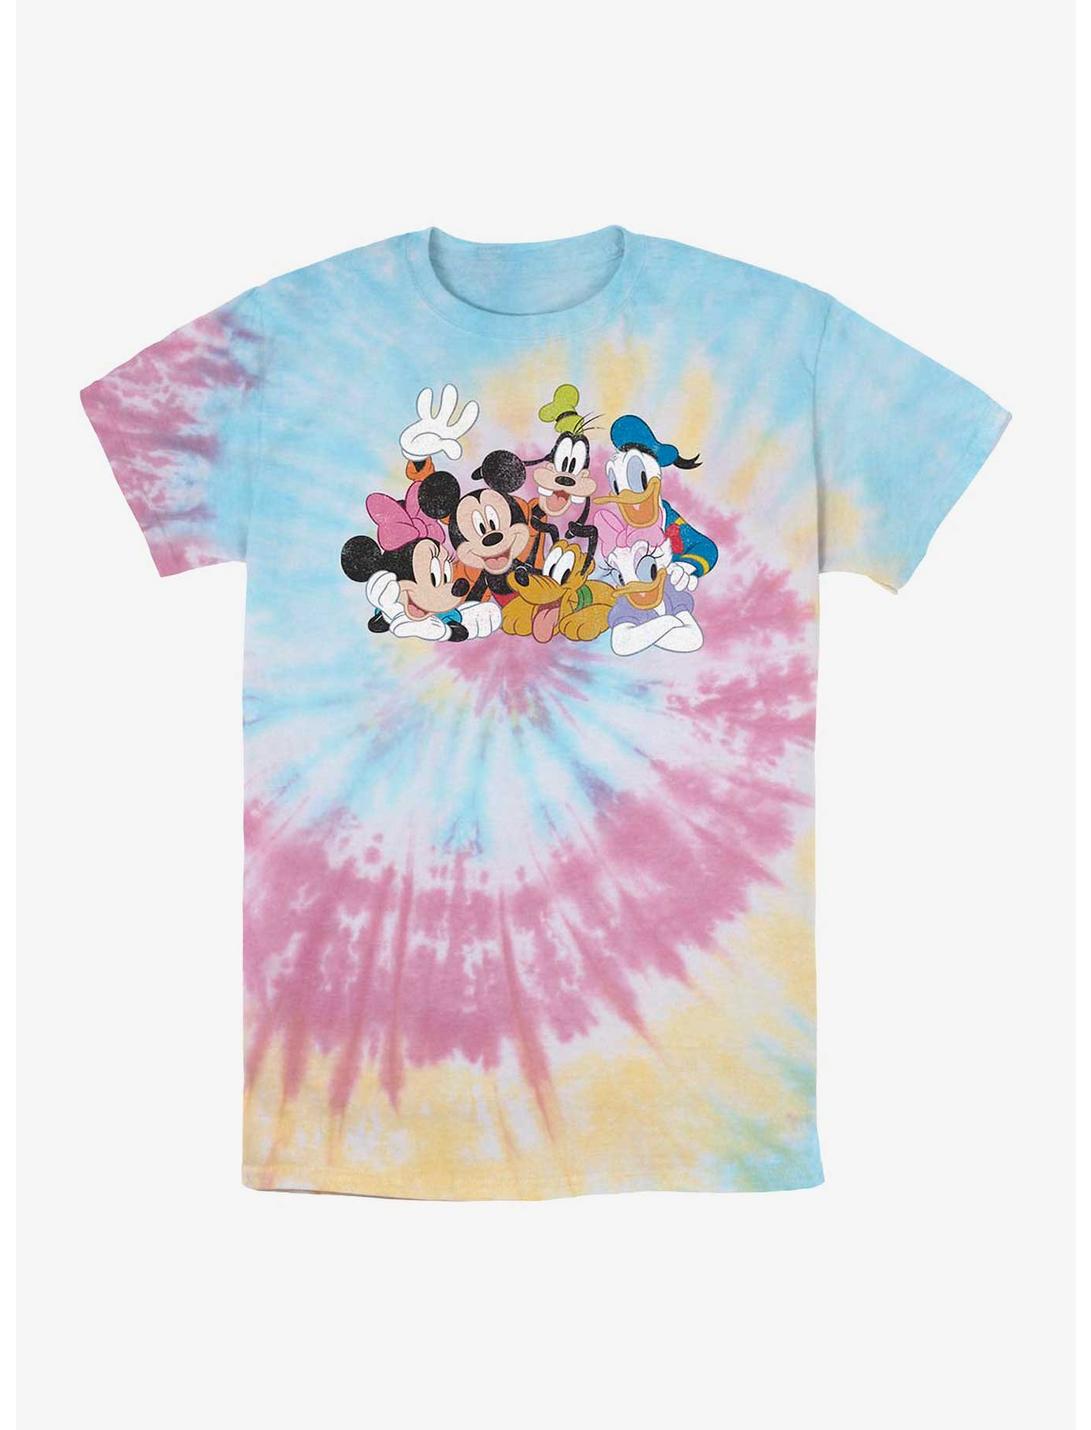 Disney Mickey Mouse & Friends Smiling Tie Dye T-Shirt, BLUPNKLY, hi-res